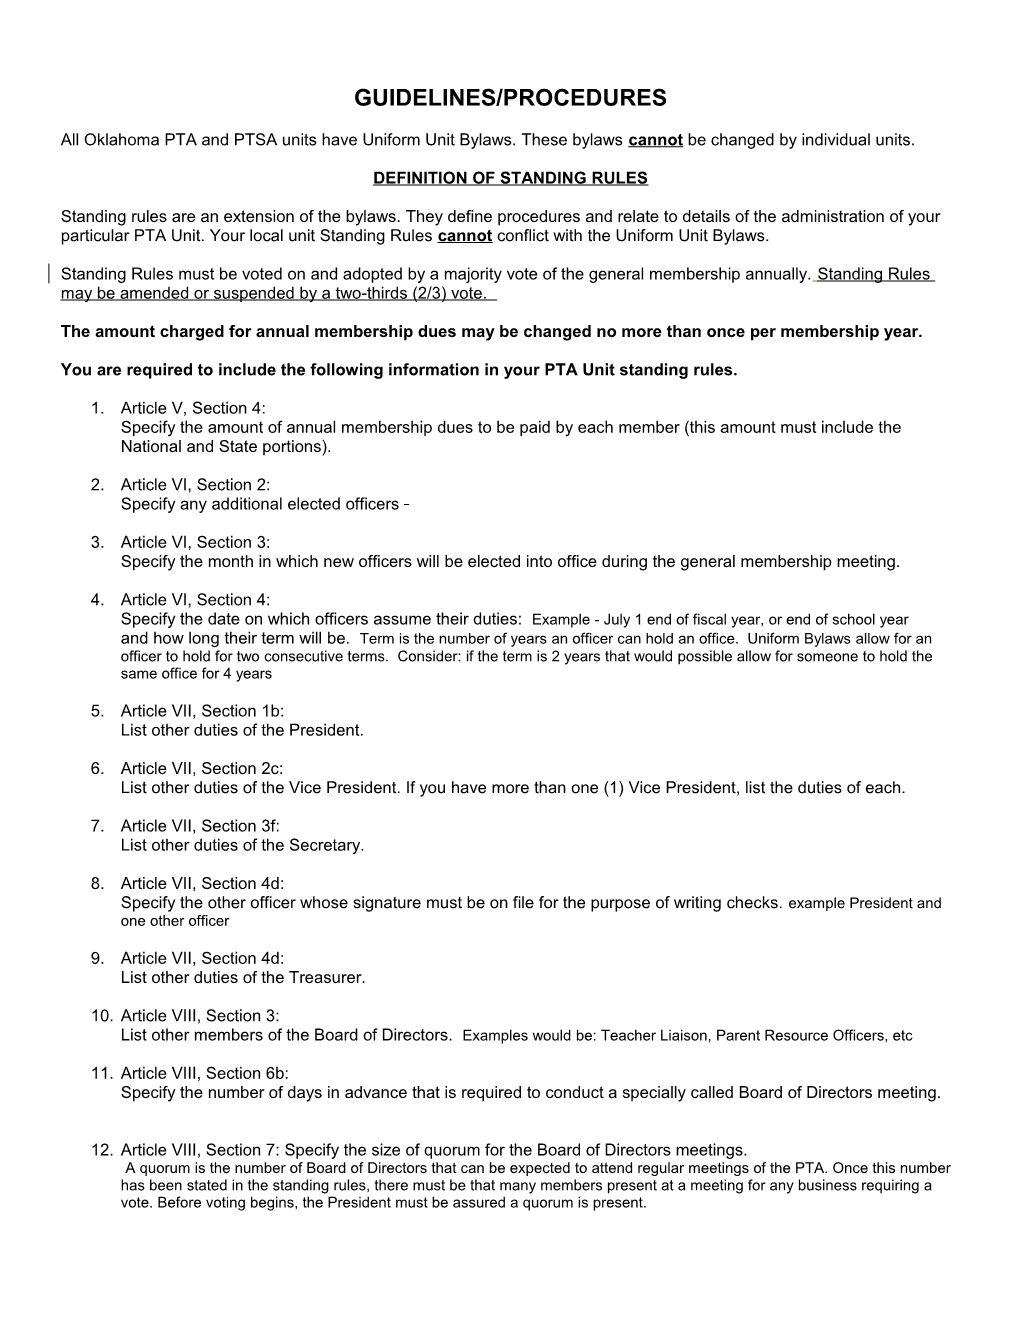 Local PTA Unit Standing Rules Guidelines